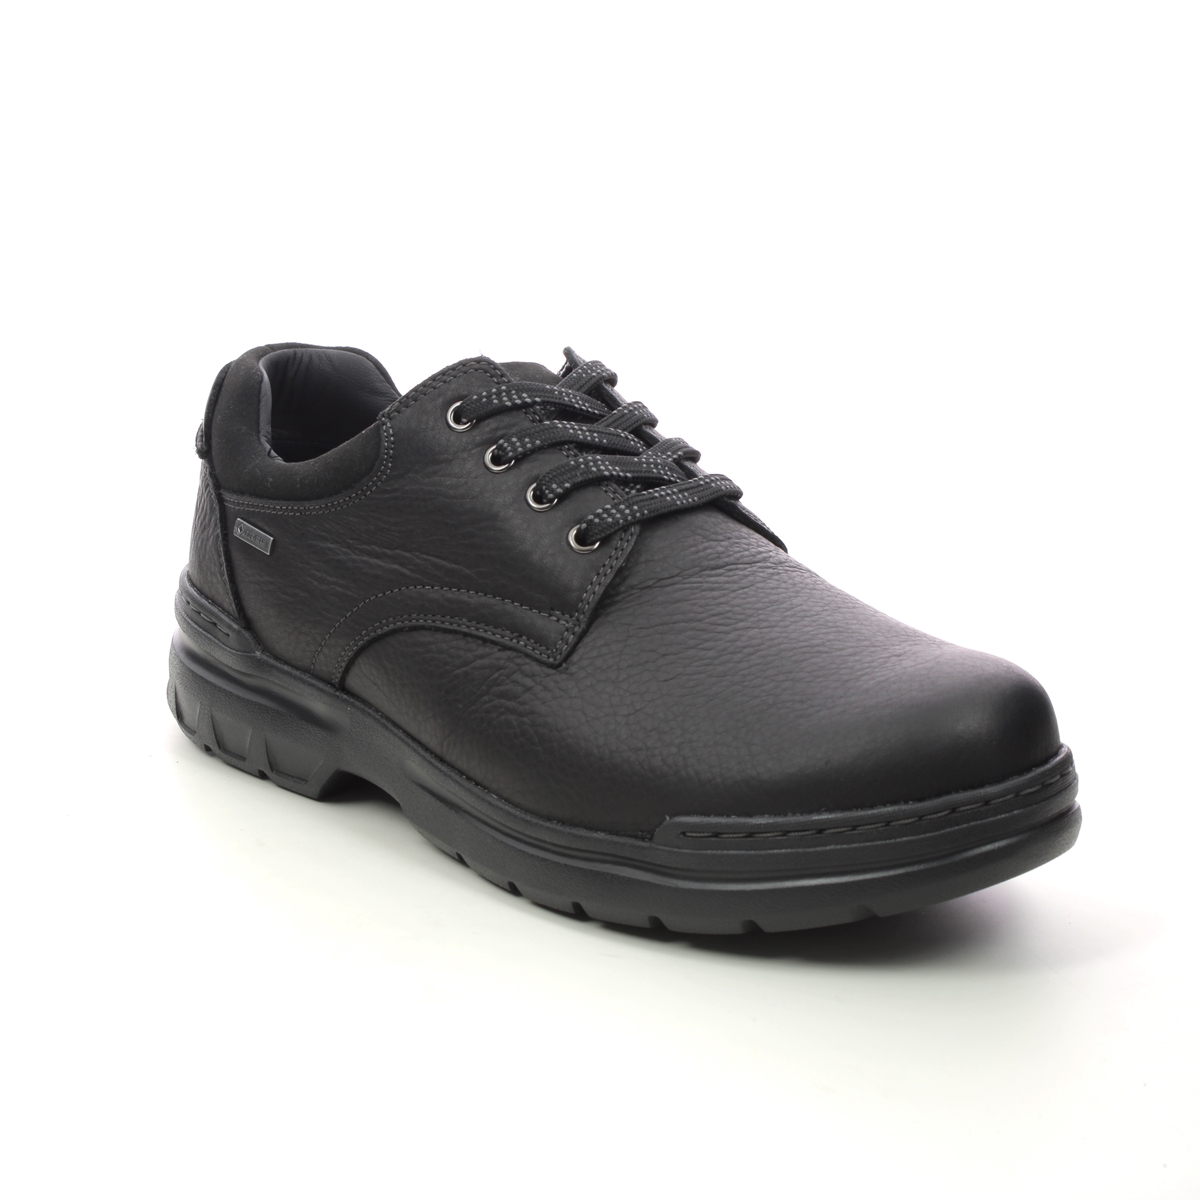 Clarks Rockie Walk Gtx Black Leather Mens Comfort Shoes 734648H In Size 7 In Plain Black Leather H Width Fitting Extra Wide